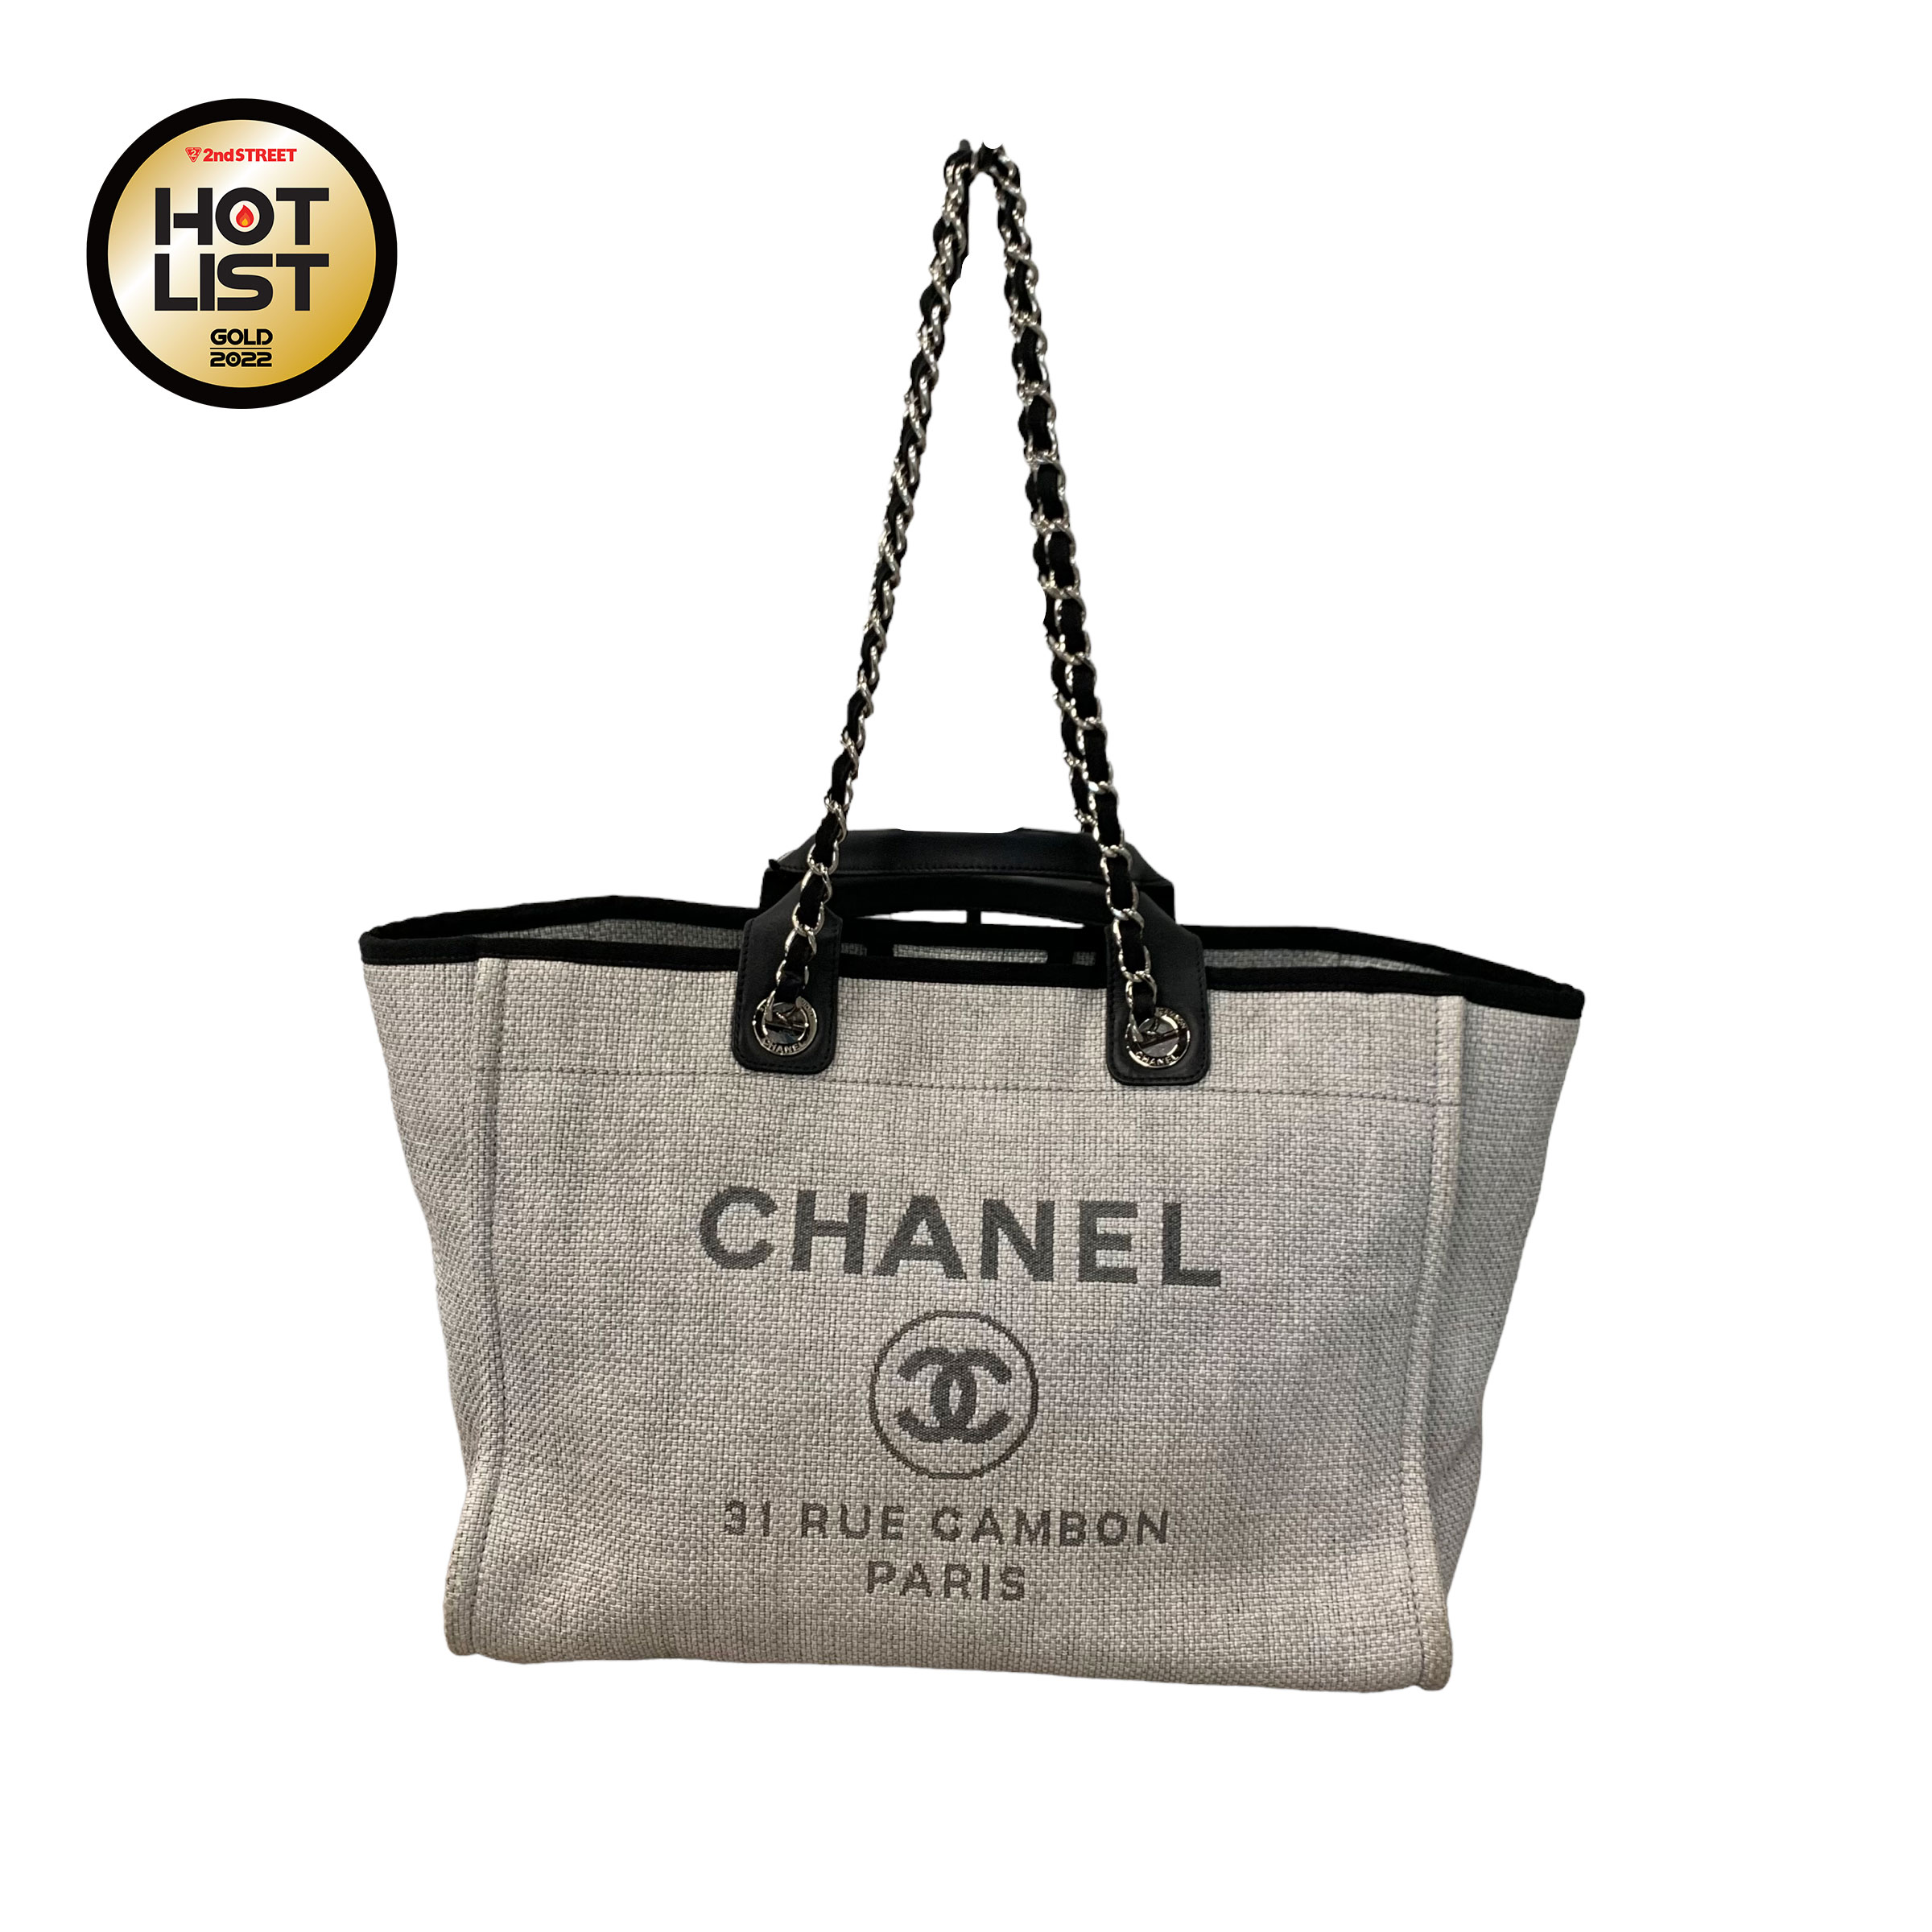 CHANEL Deauville Tote Bag